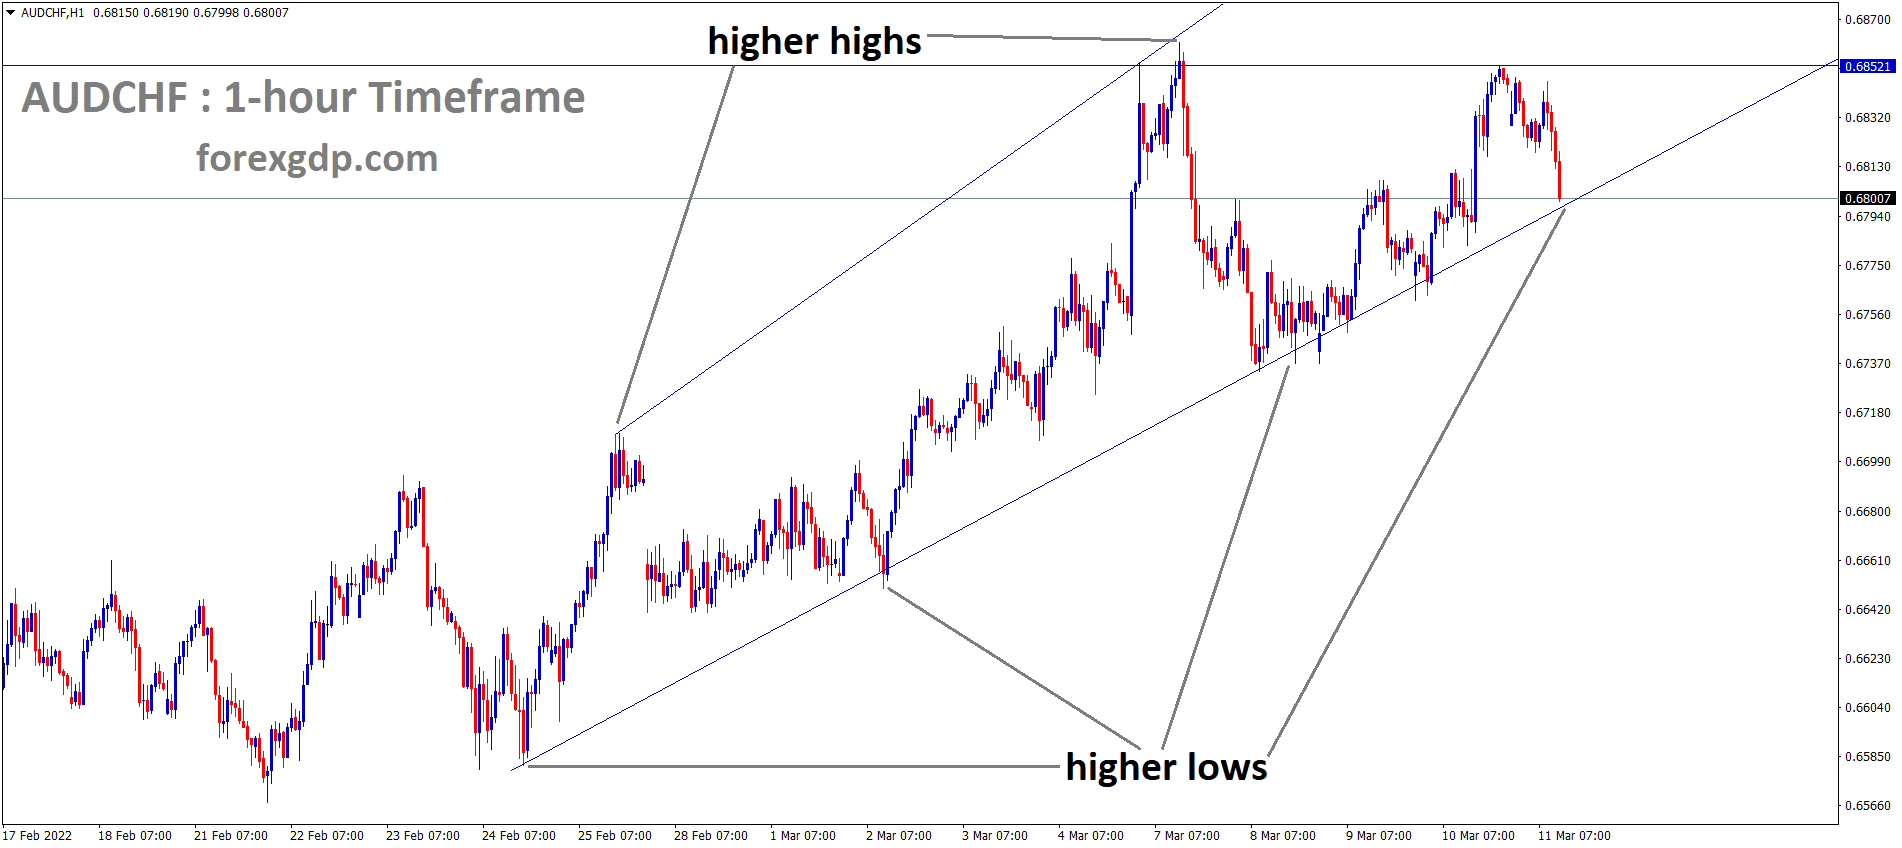 AUDCHF is moving in the Rising wedge pattern and the market has reached the higher low area of the pattern